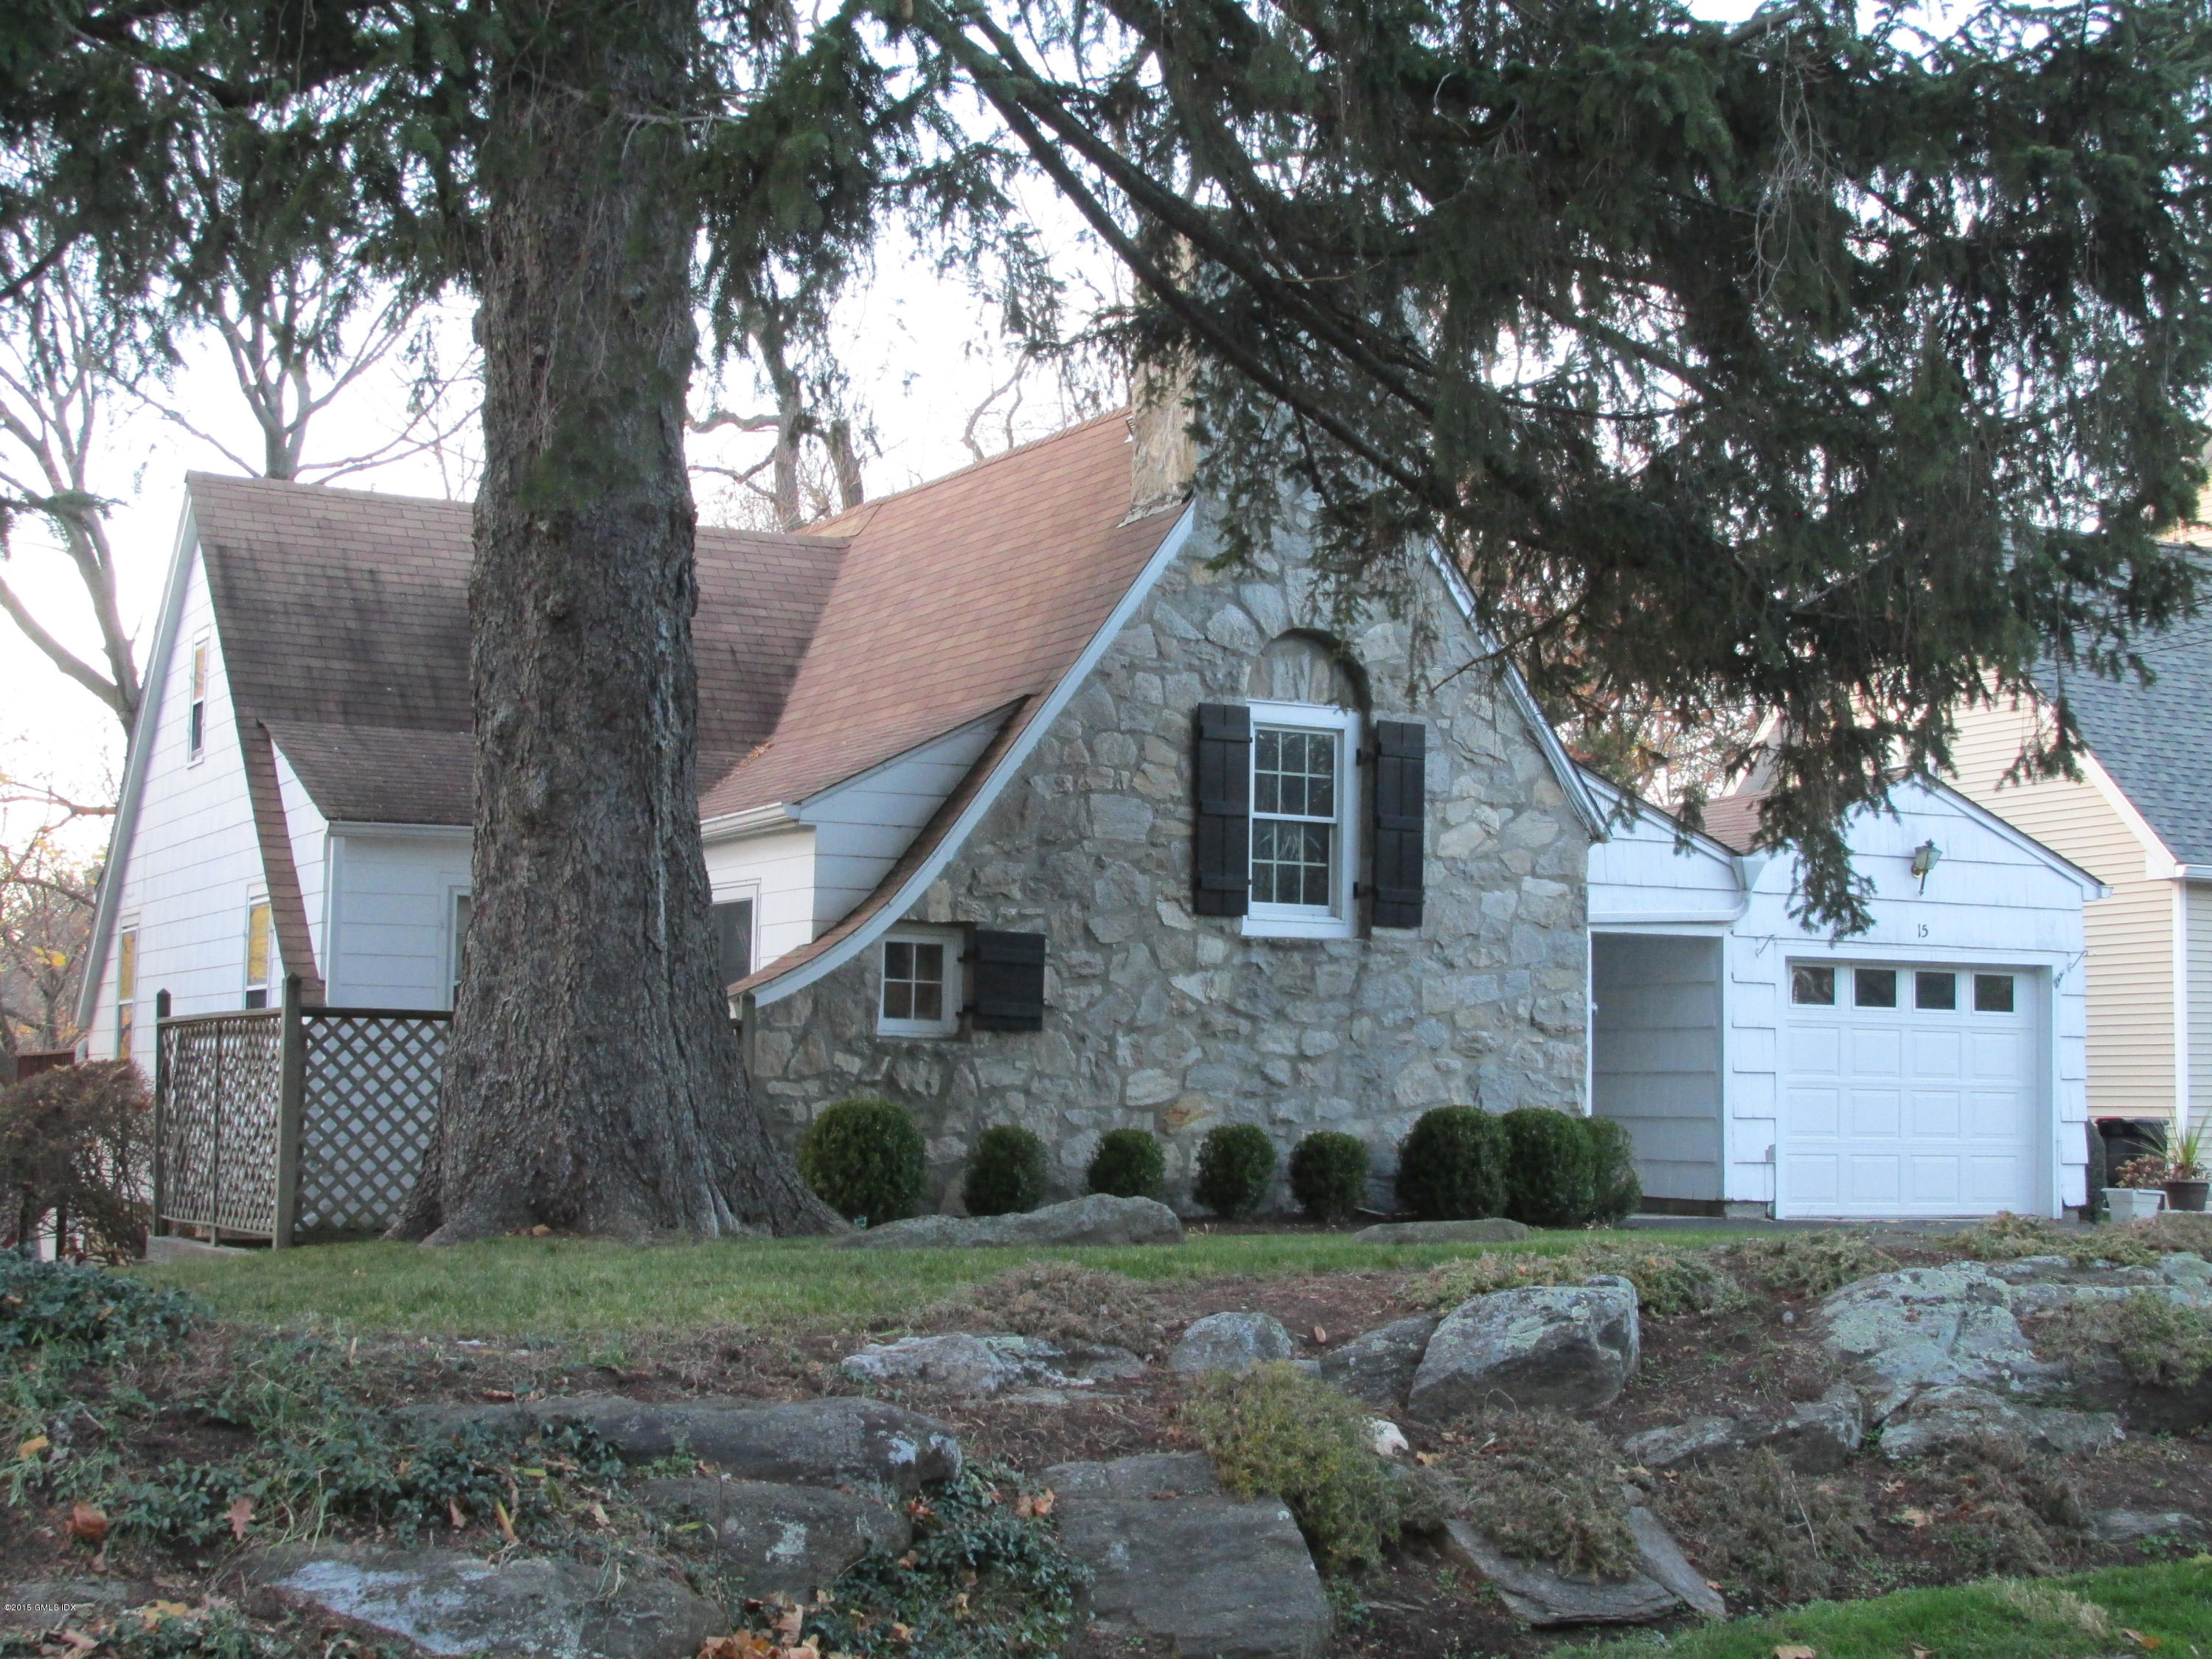 a view of a brick house next to a large tree